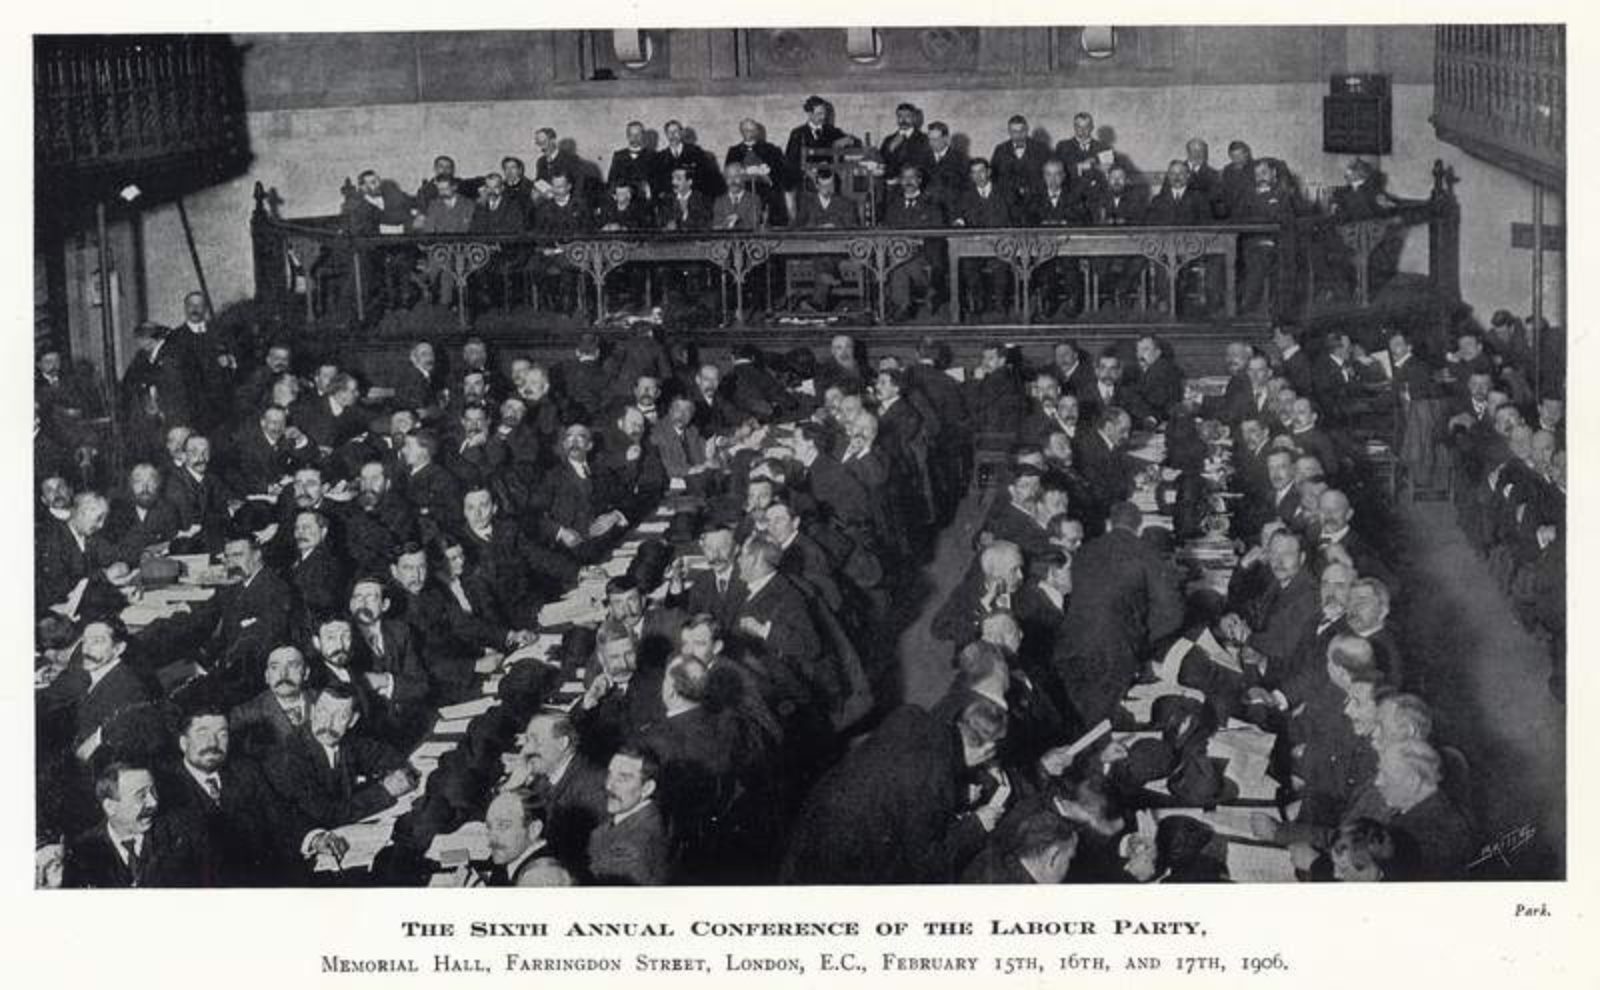 The Labour Representation Committee (LRC) did not officially adopt the title the Labour Party until 1906